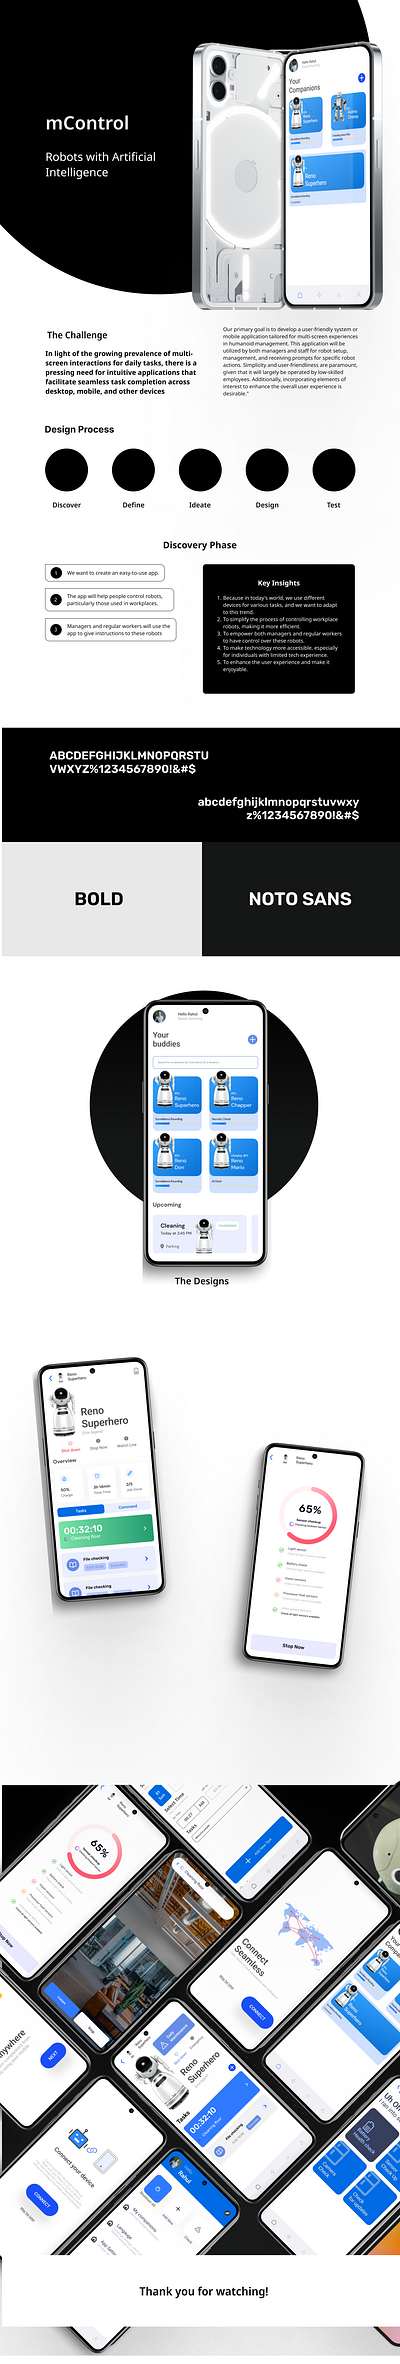 mControl Humanoid Remote Control ai app design automationapp chatgpt controller factoryautomation figmadesign industrialdesign industrialtech iotapp mobileappdesign remote remote control taskmanagement techsolutions user friendly userexperience workplacetechnology